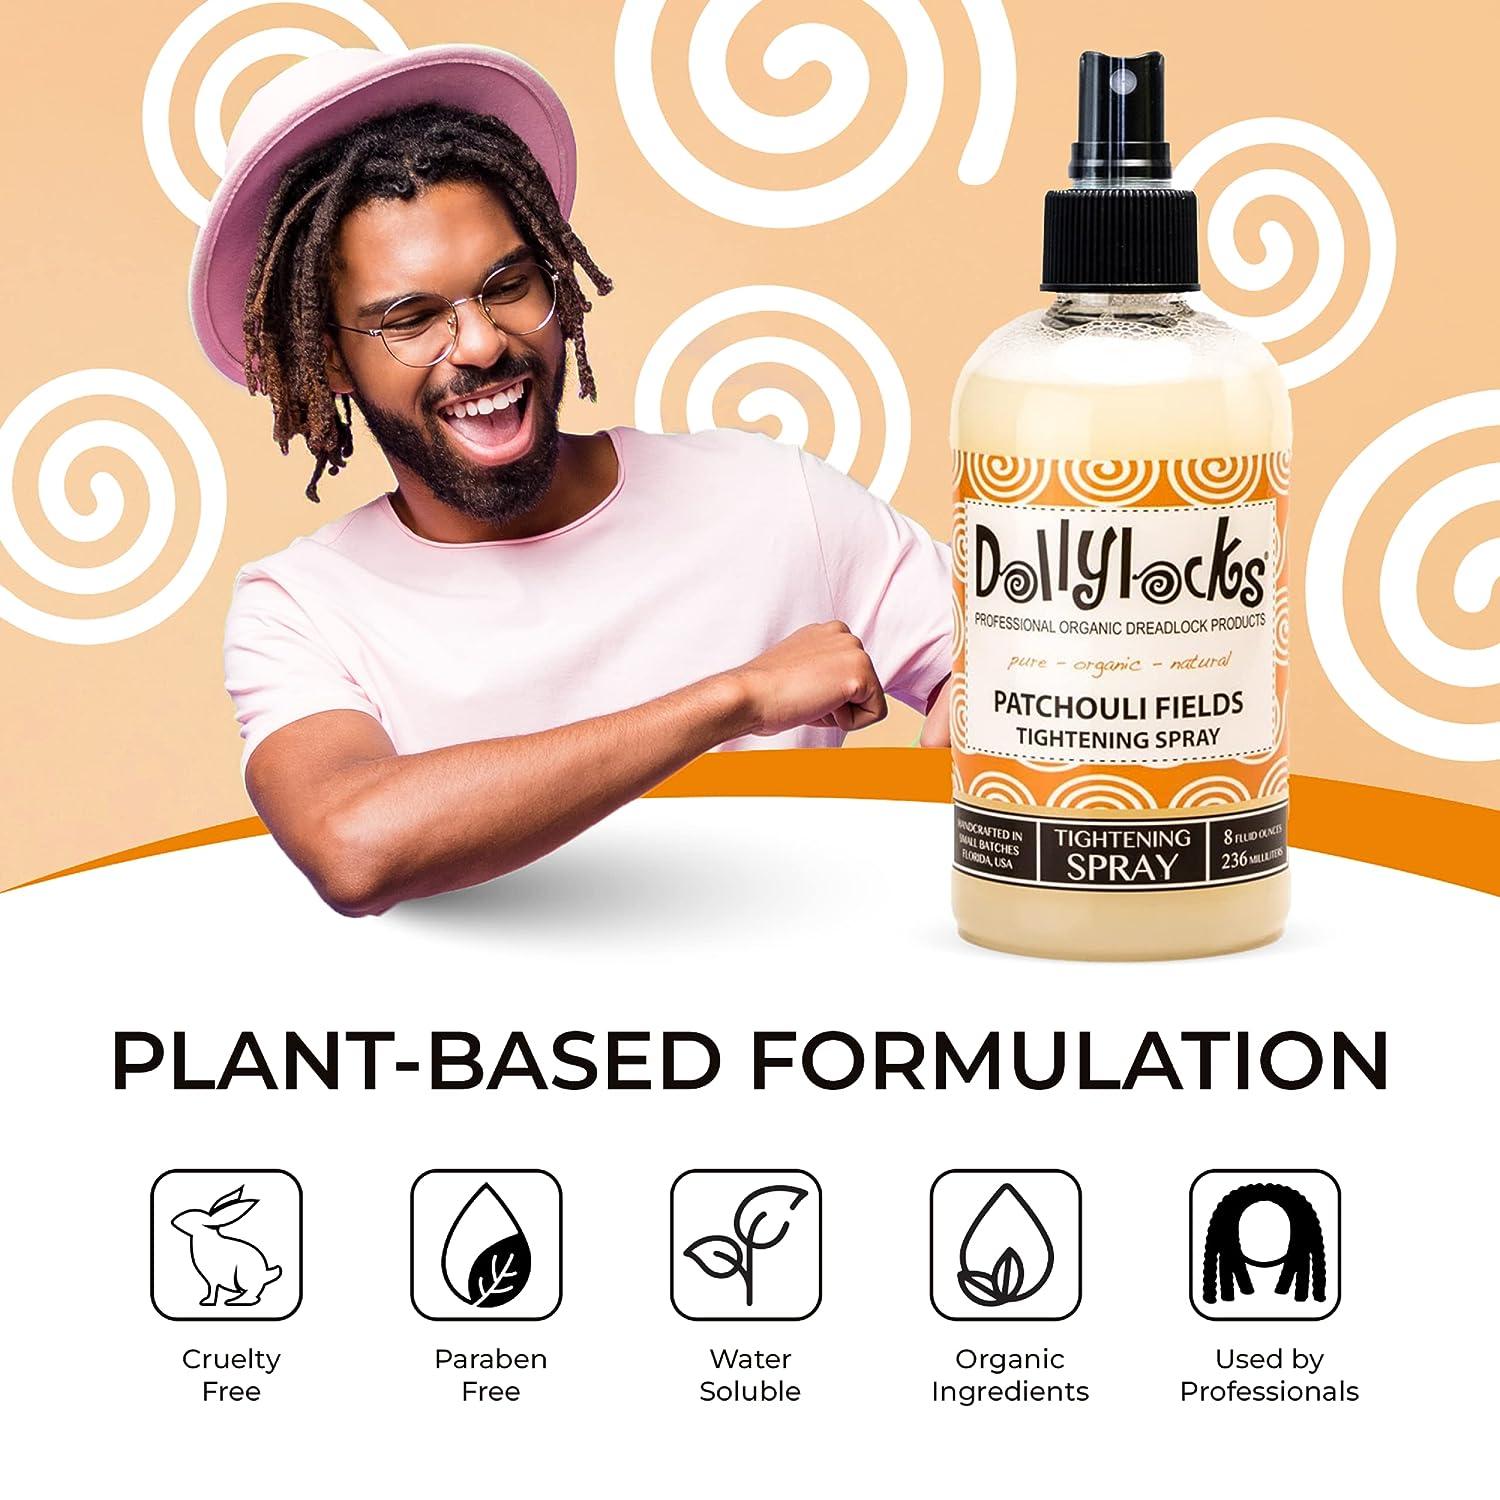  Dread Scents For Him, Organic Daily Moisturizing Refreshing  Spray for Dreadlocks, Locs, Braids, Essential Oils, Vitamins, Natural Care  for Scalp and Hair, Dreadlock Hair Products : Handmade Products